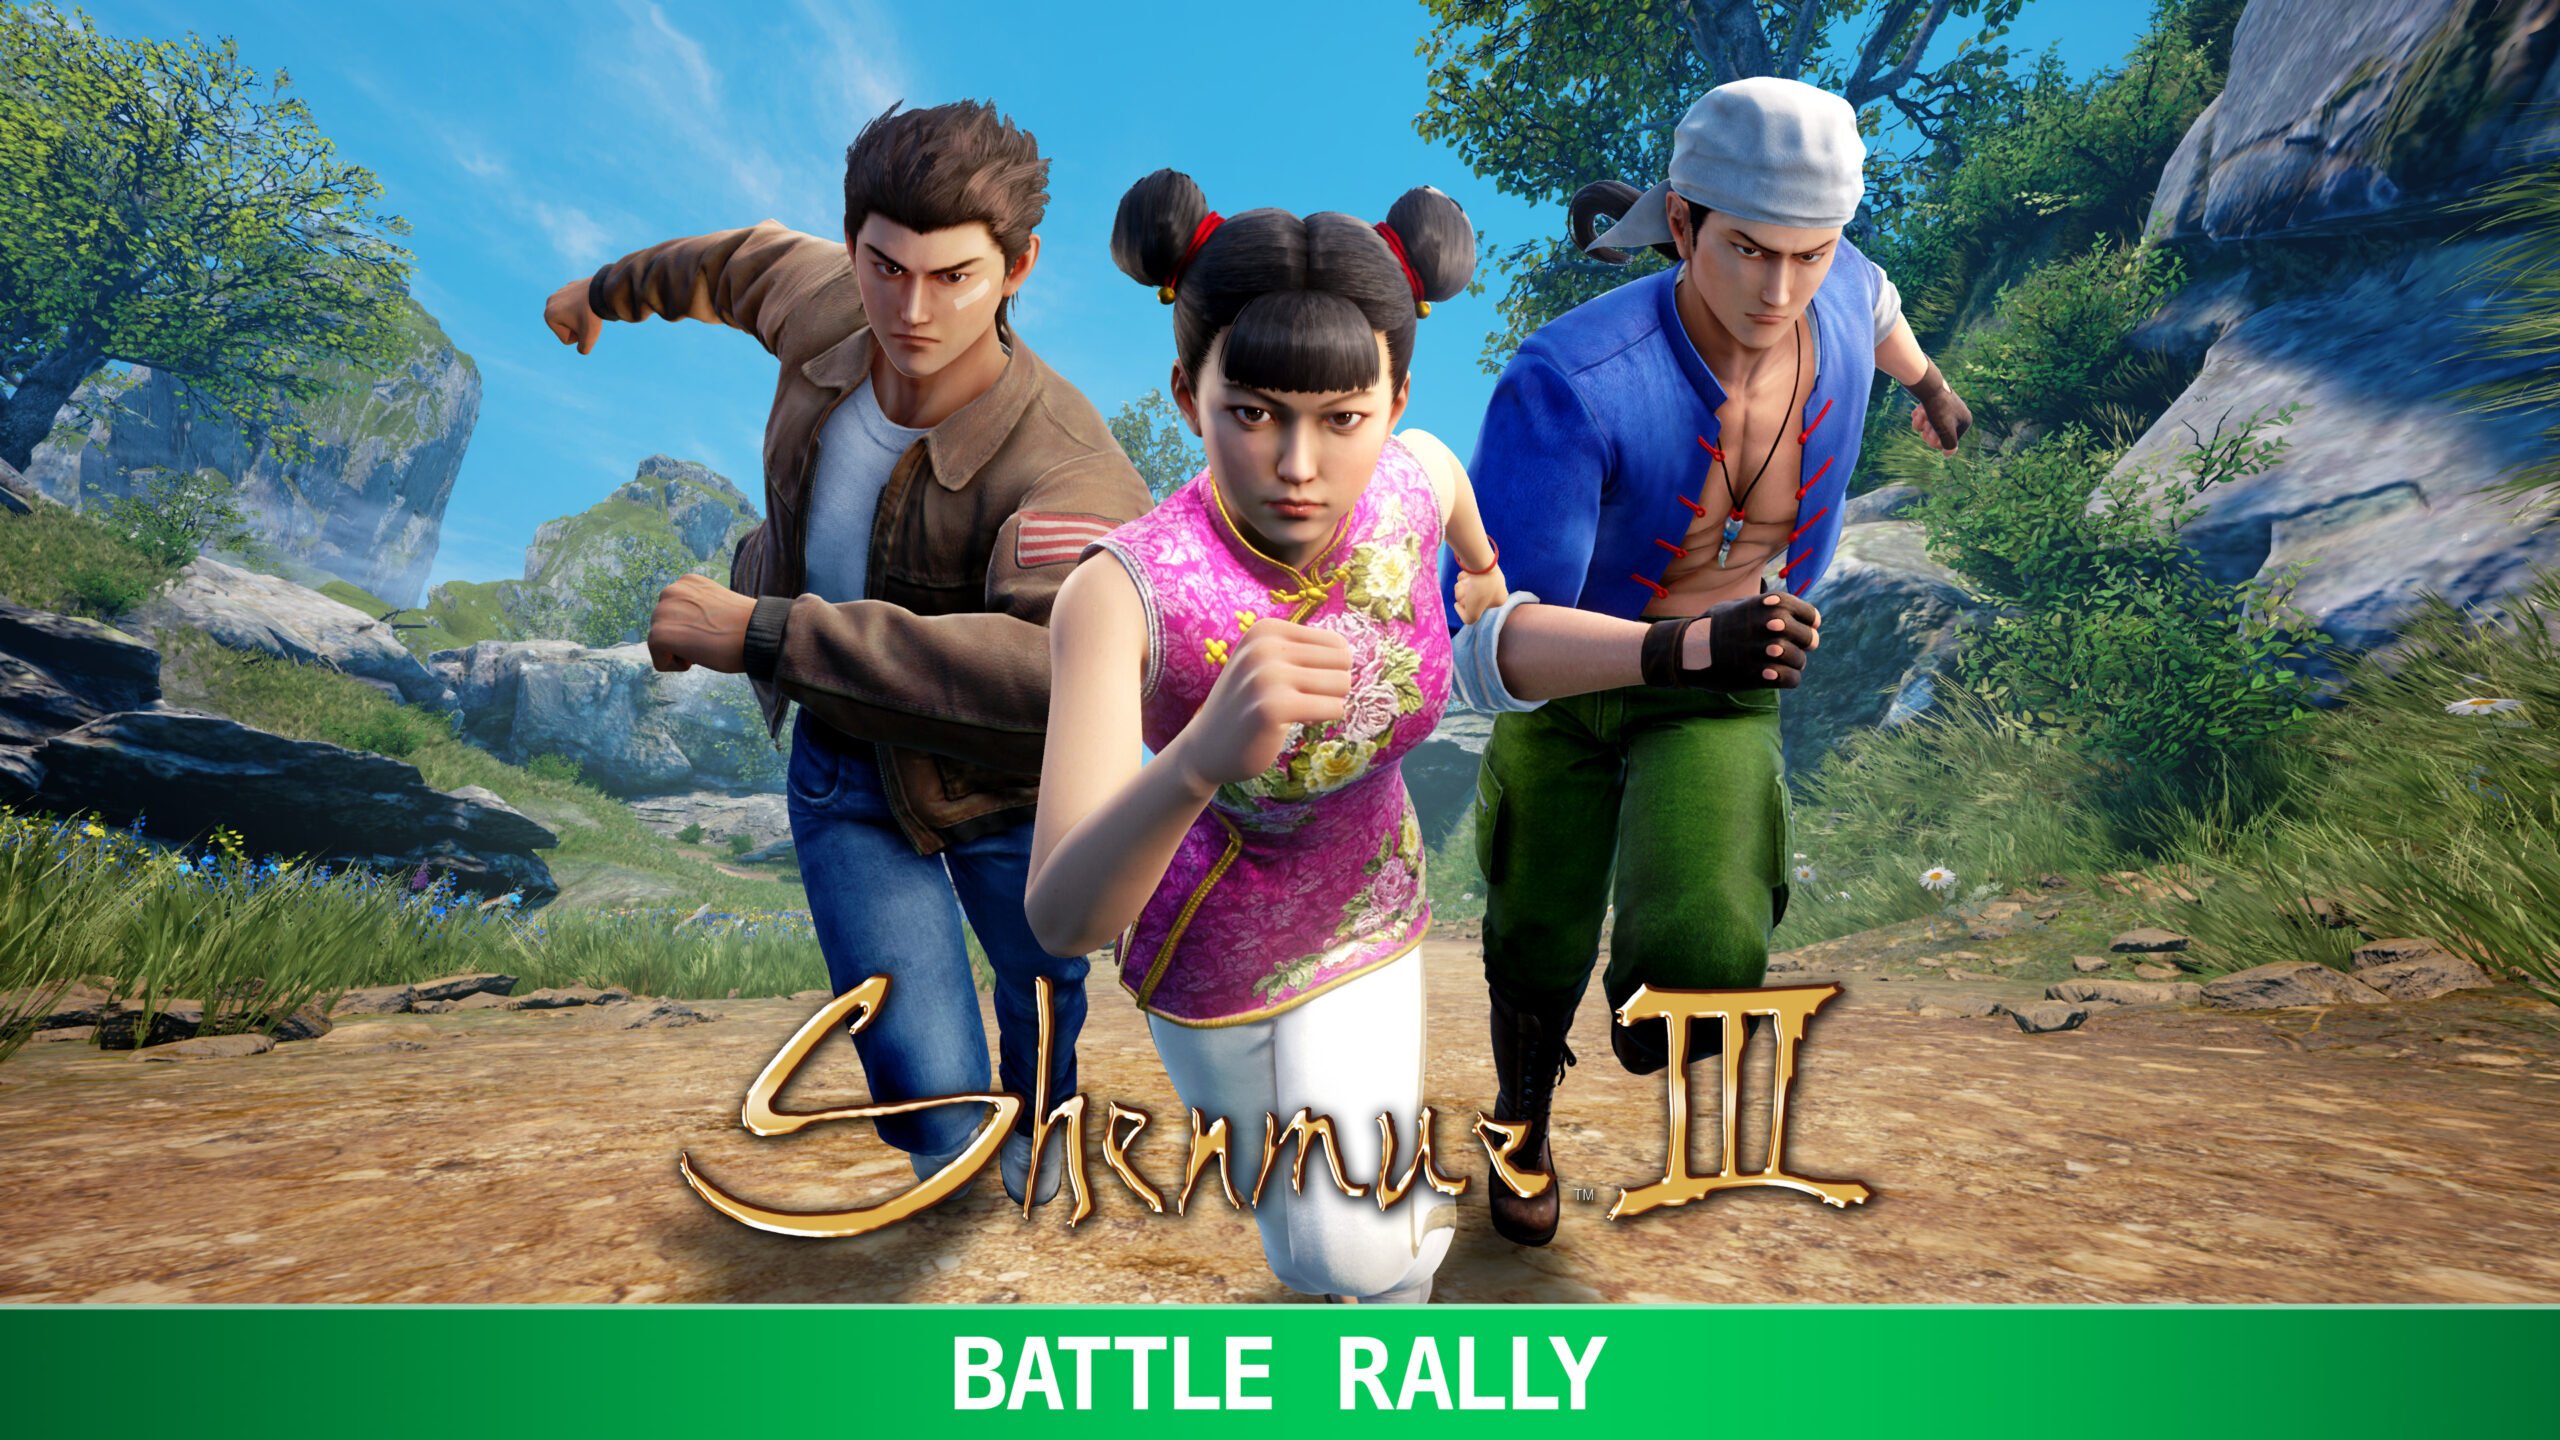 190432-Shenmue-III-DLC_01-15-20-scaled.j